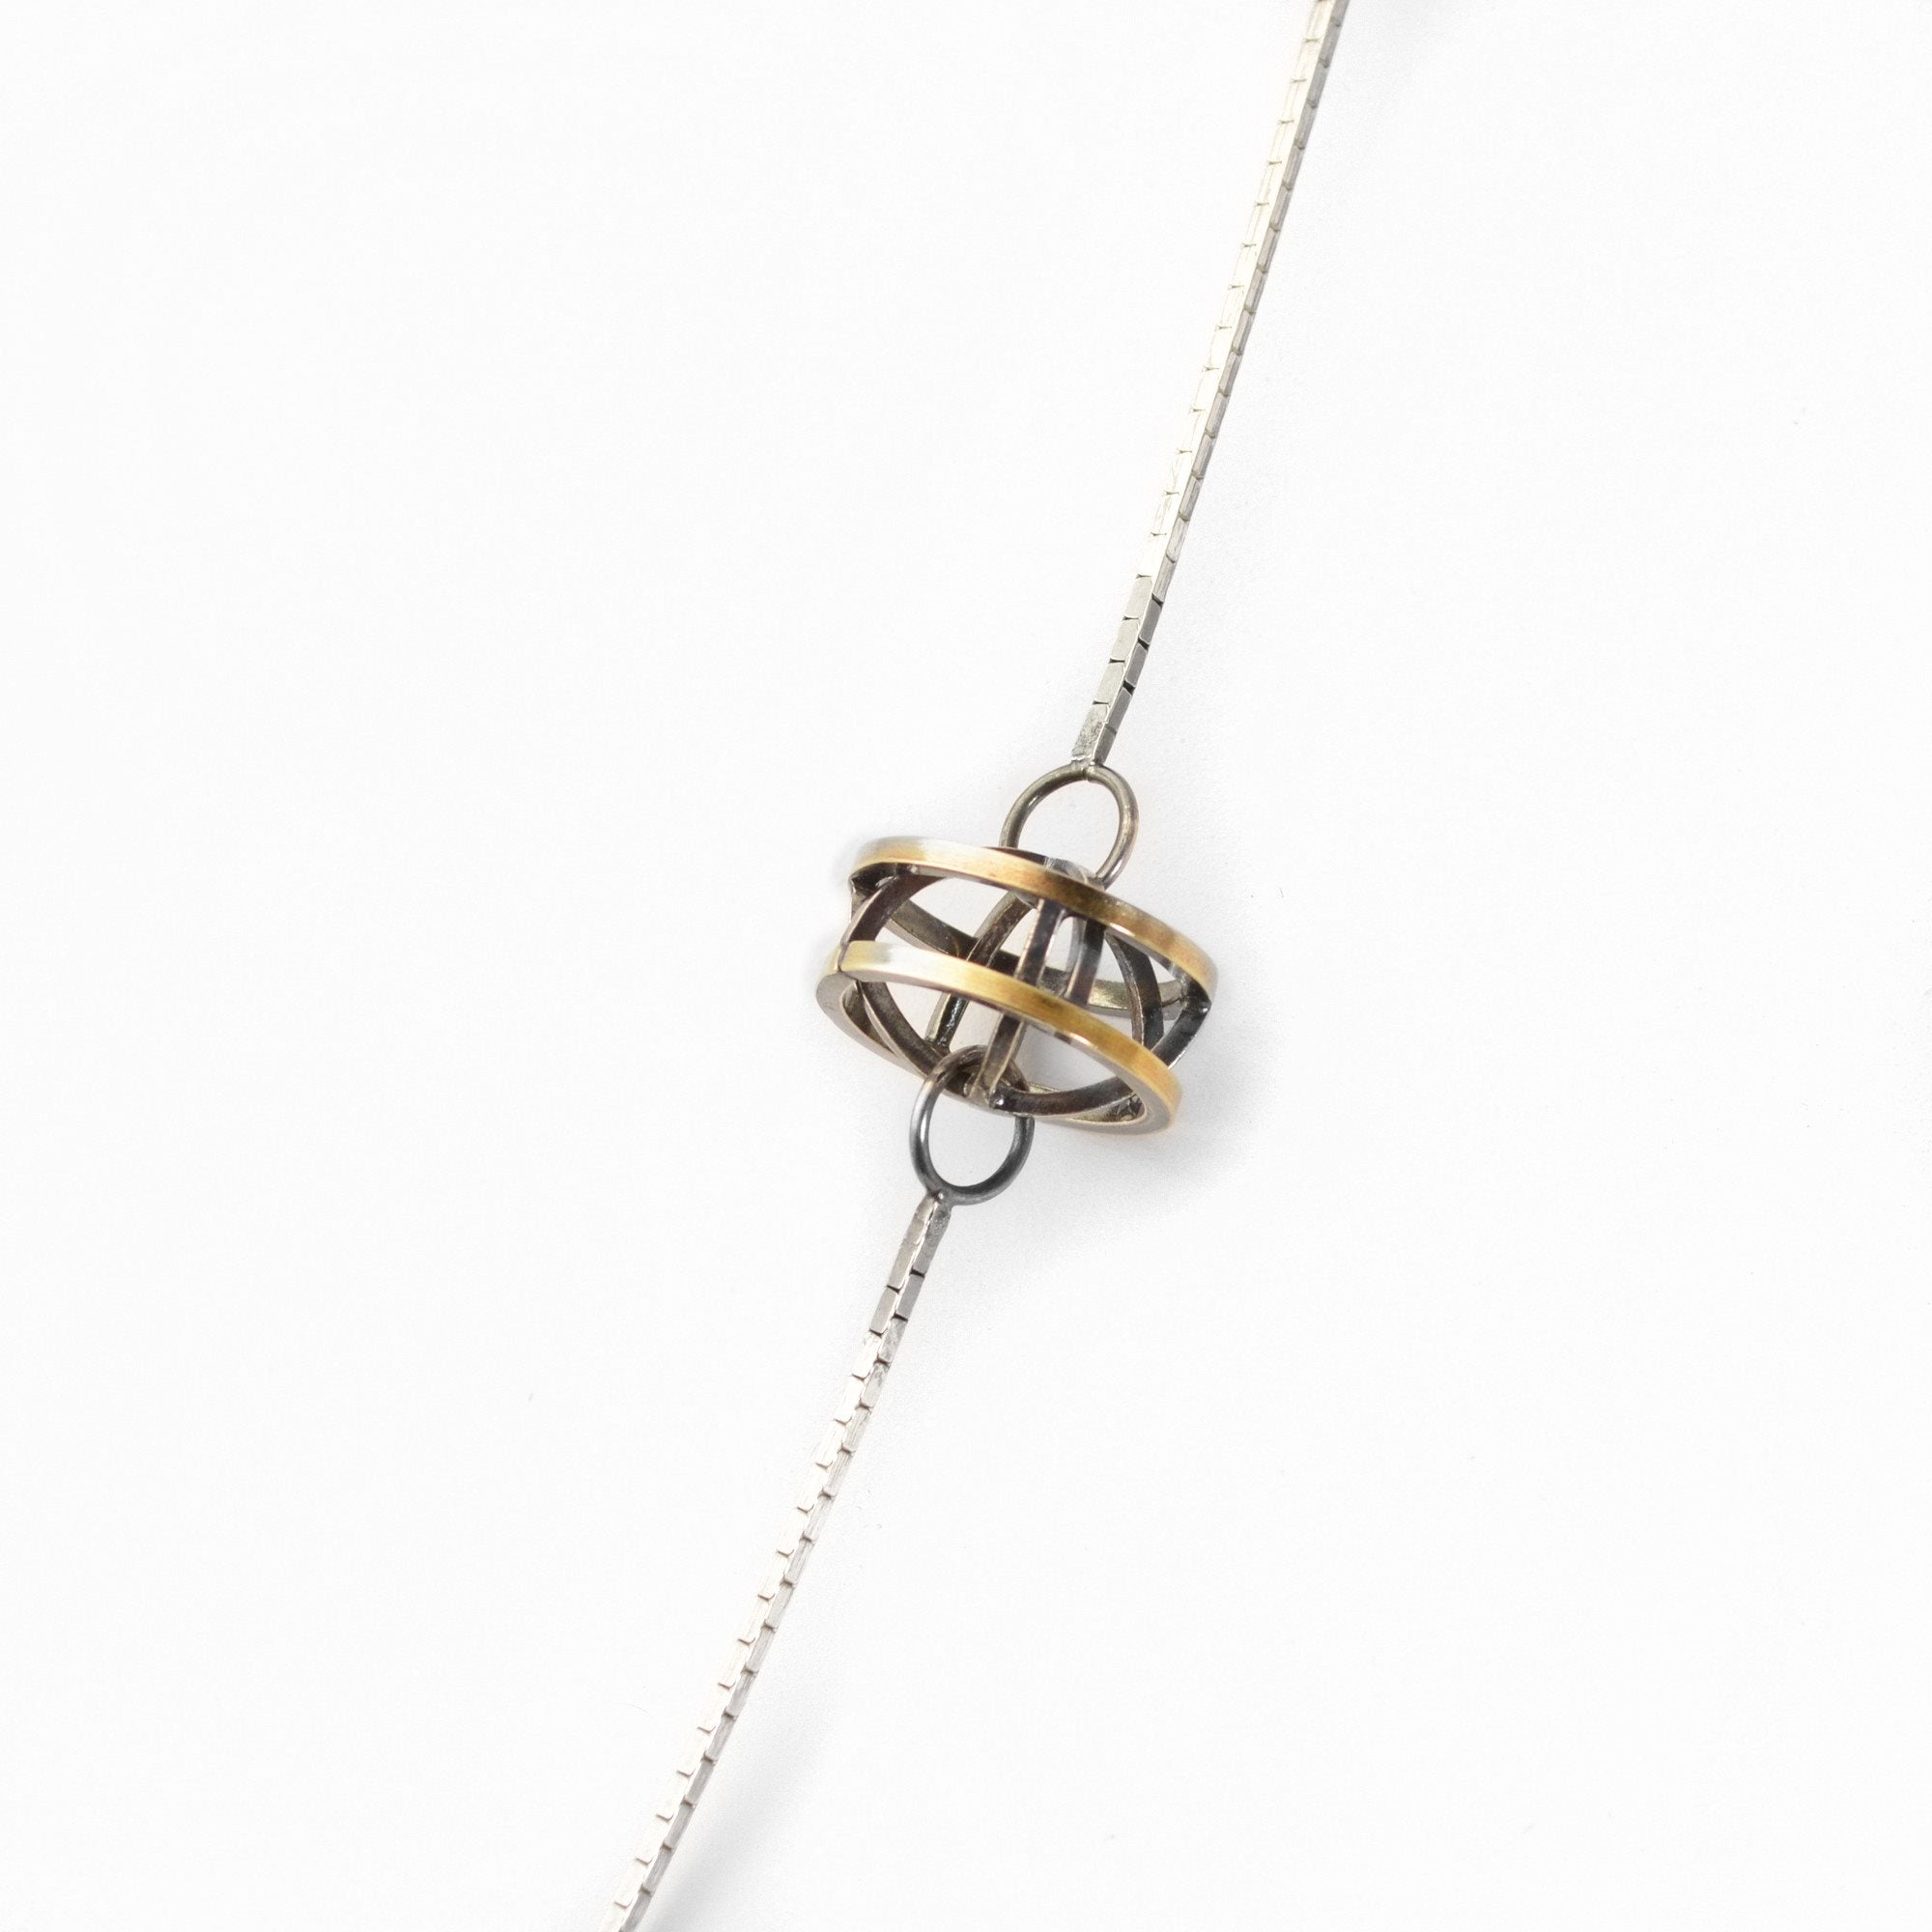 Lattis Long Necklace in Black and Gold with three Geometric Stations